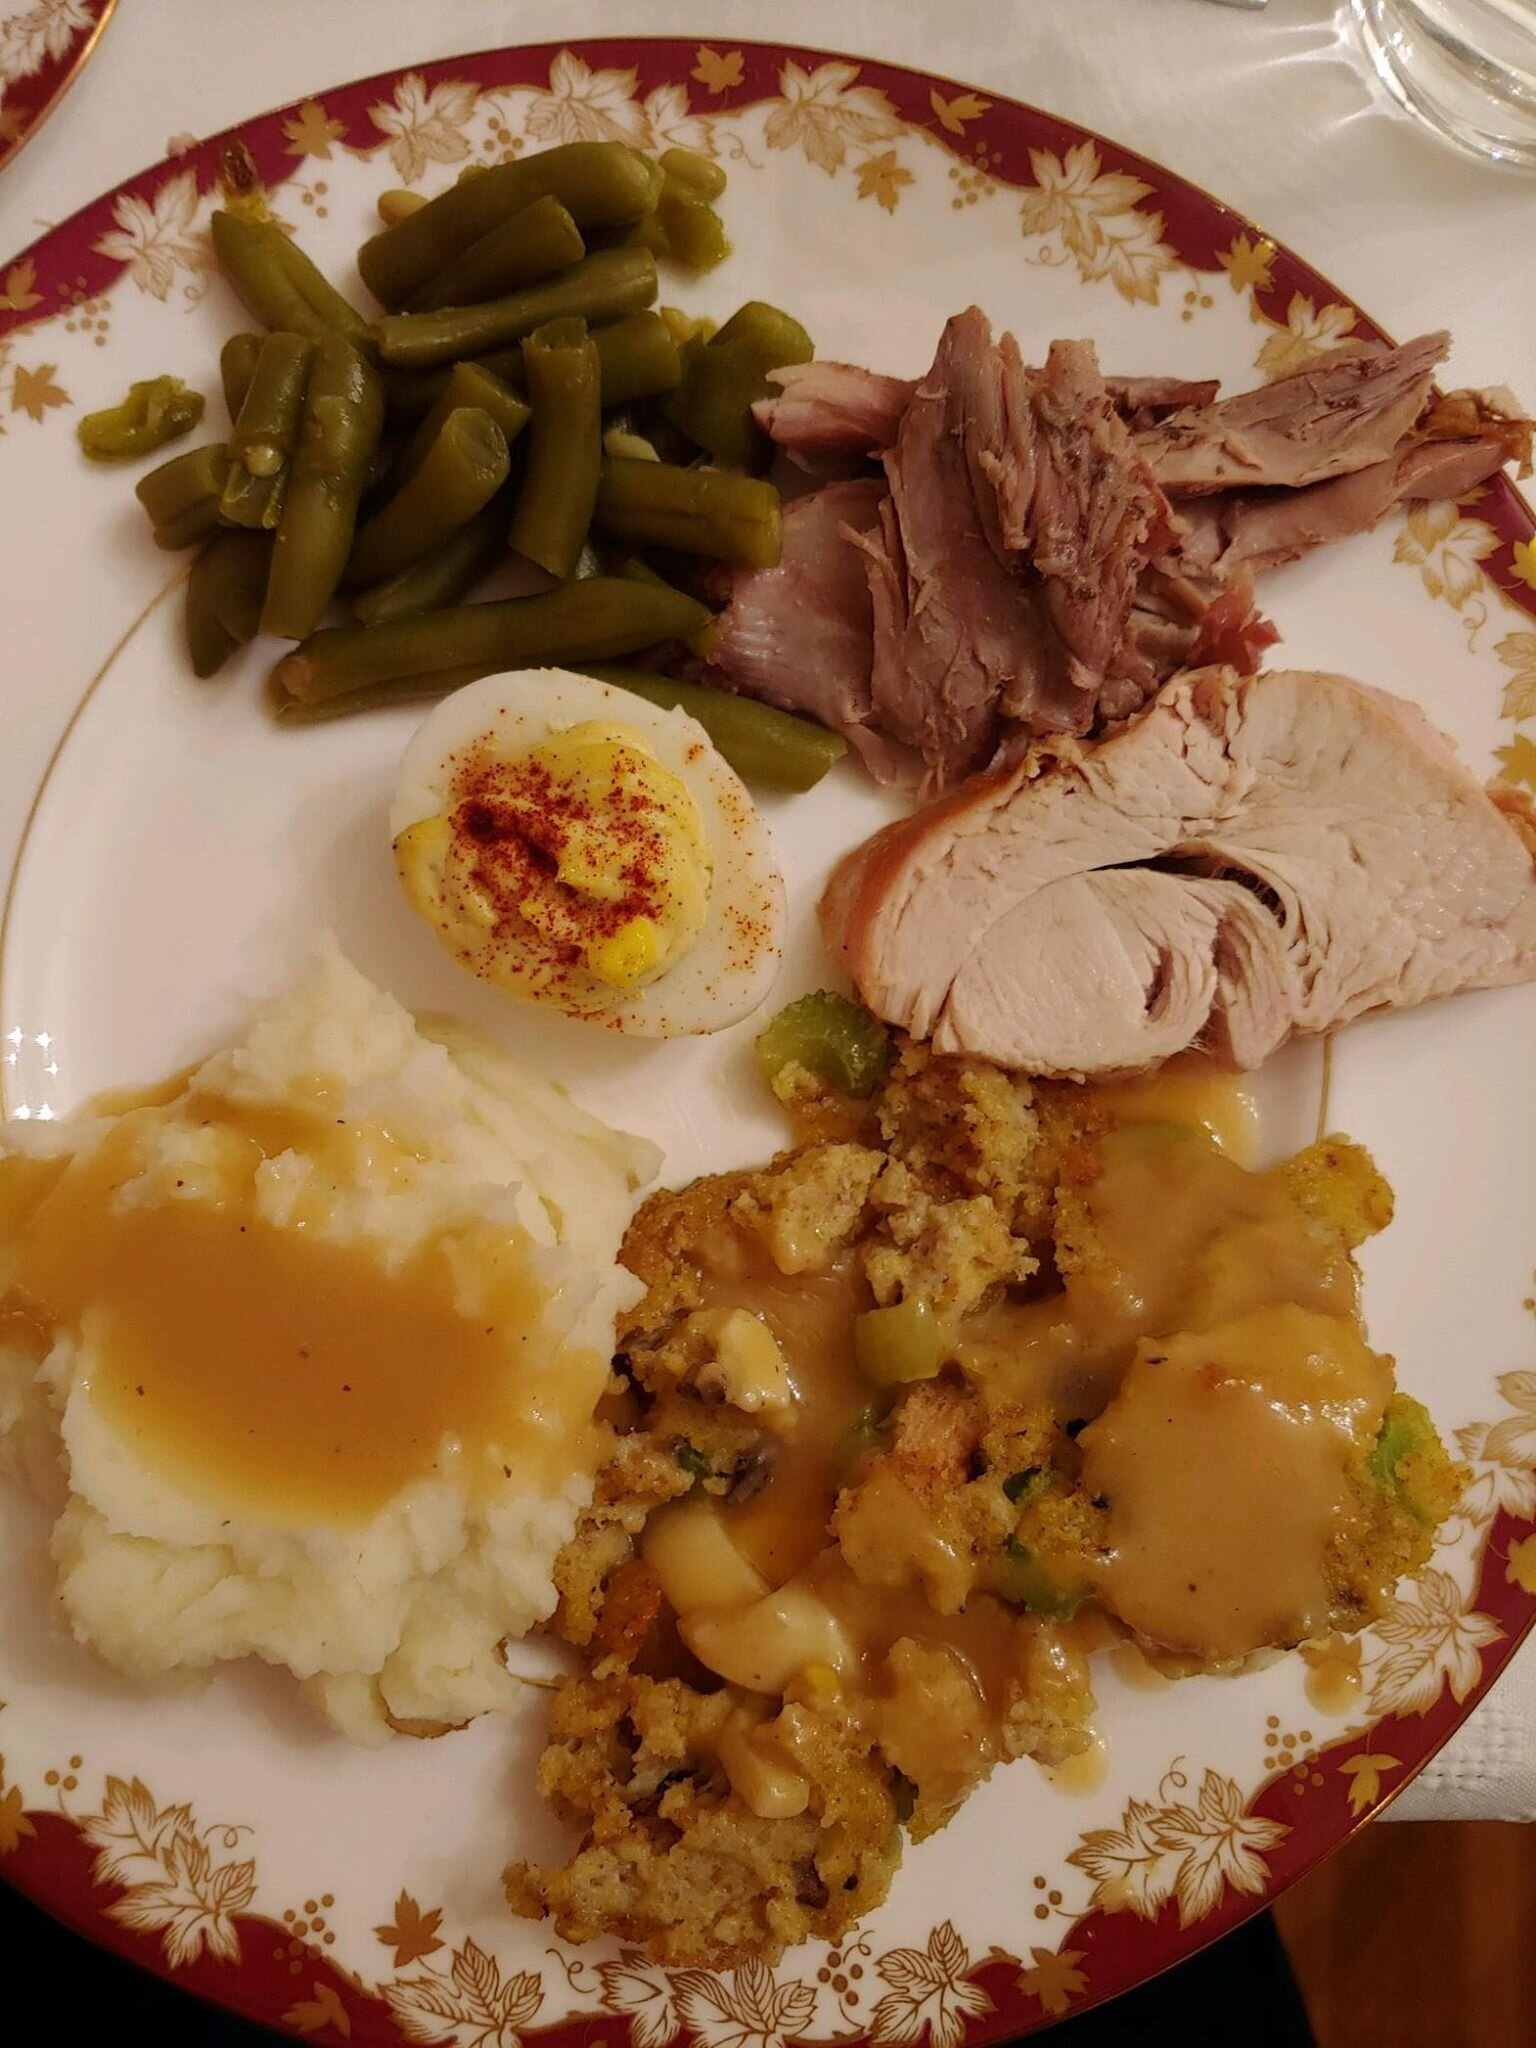 Statia’s Thanksgiving meal